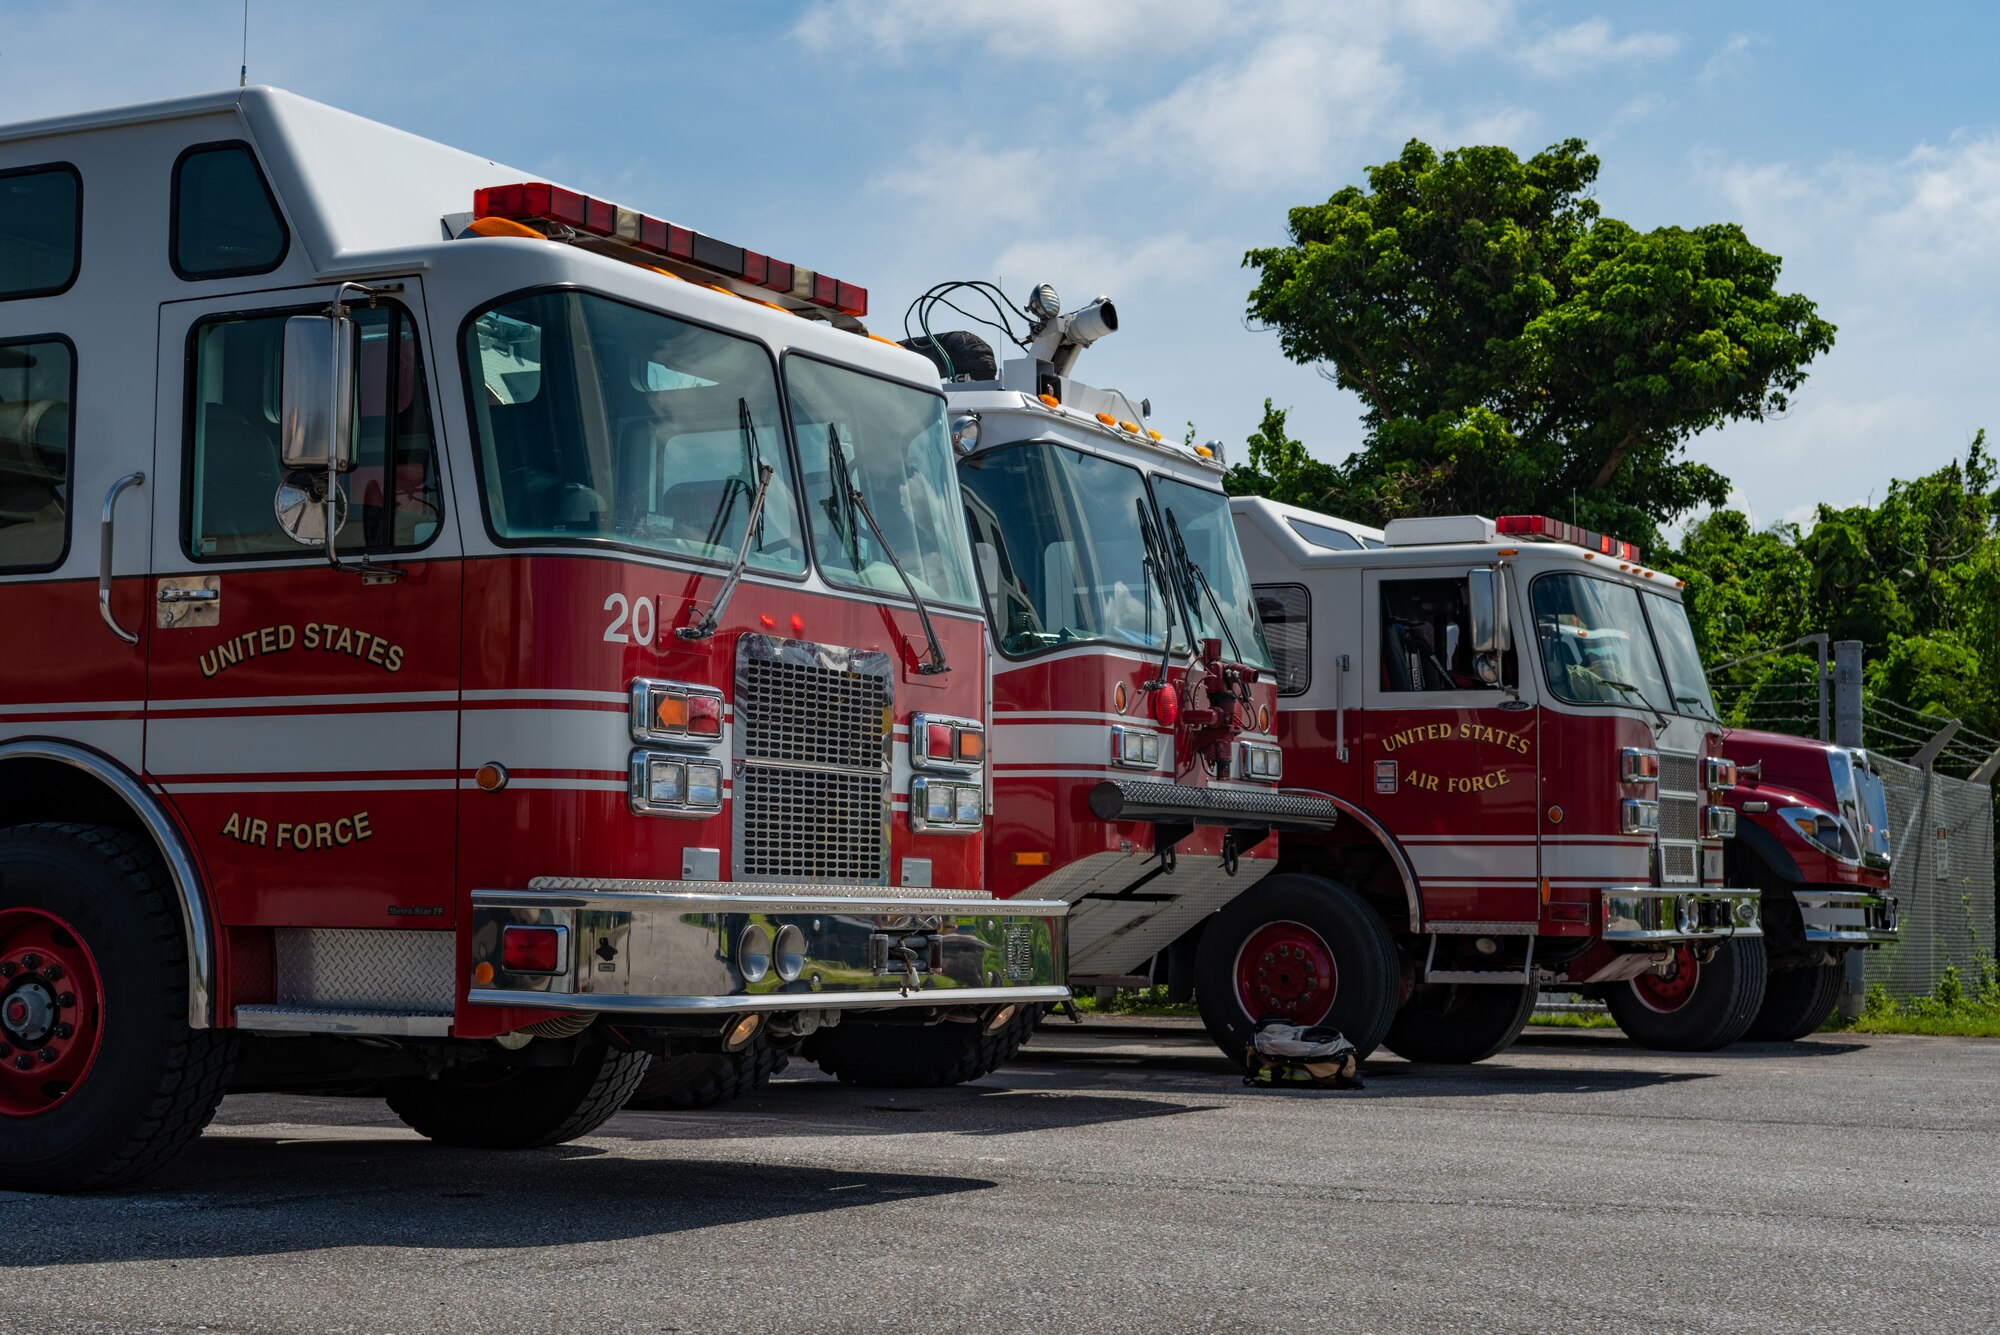 Fire department vehicles assigned to the 18th Civil Engineer Squadron standby on a safe site near a simulated chemical spill during a hazardous material training exercise July 11, 2019, on Kadena Air Base, Japan. The main objective of the HazMat training is for firefighters to familiarize themselves with hazardous materials and prevent them from spreading. (U.S. Air Force photo by Senior Airman Cynthia Belío)